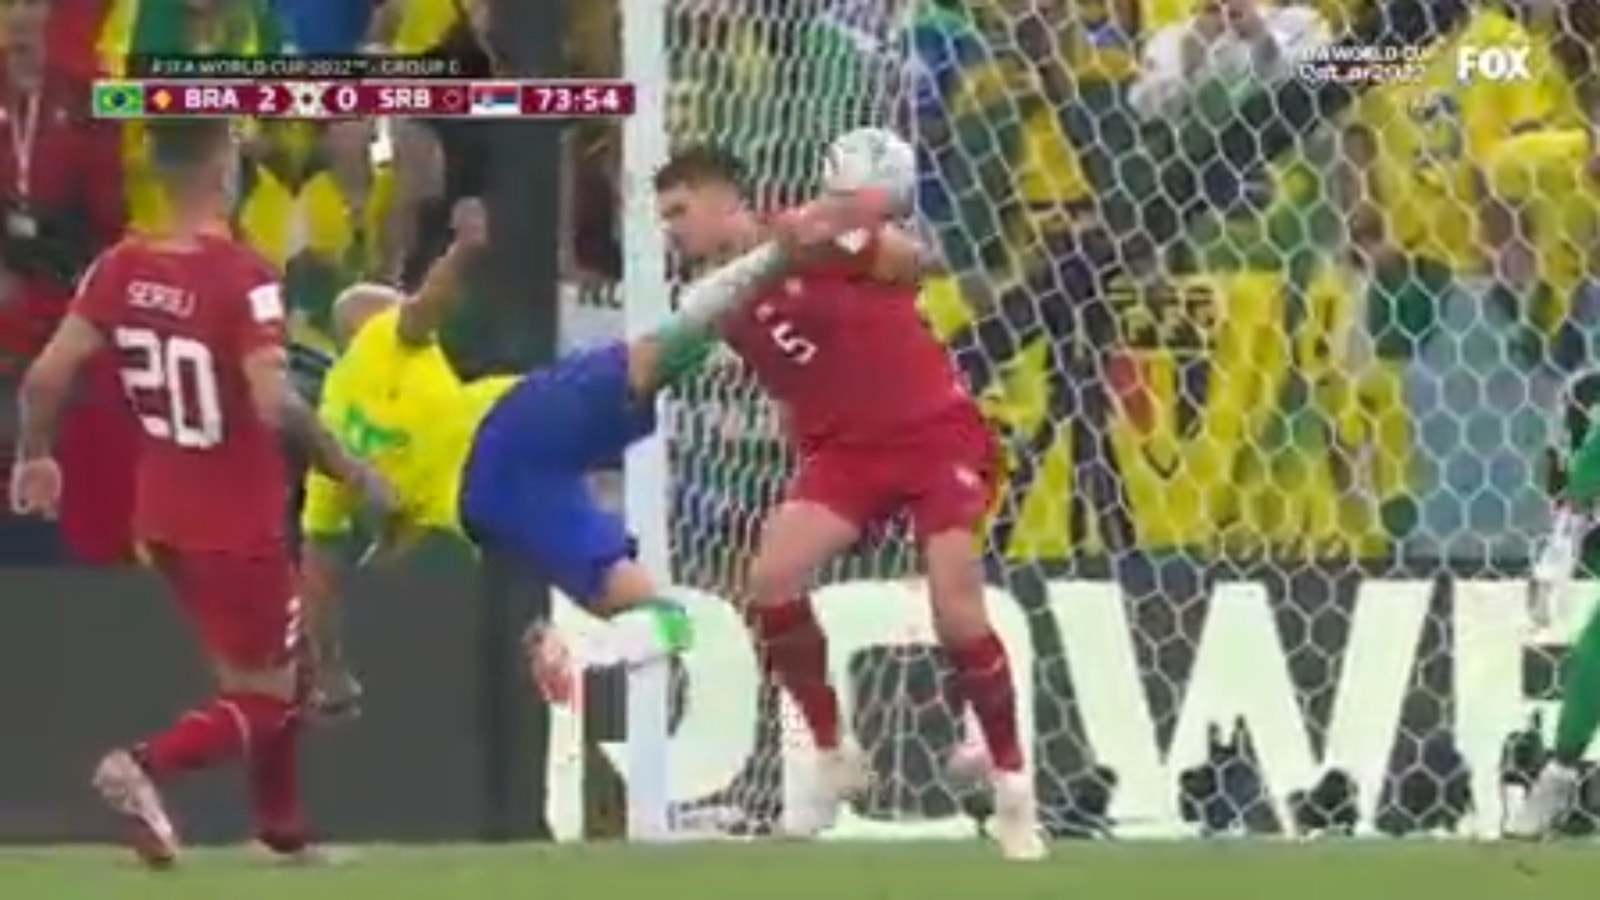 Richarlison gave Brazil a 2-0 lead in the 73rd with an acrobatic goal